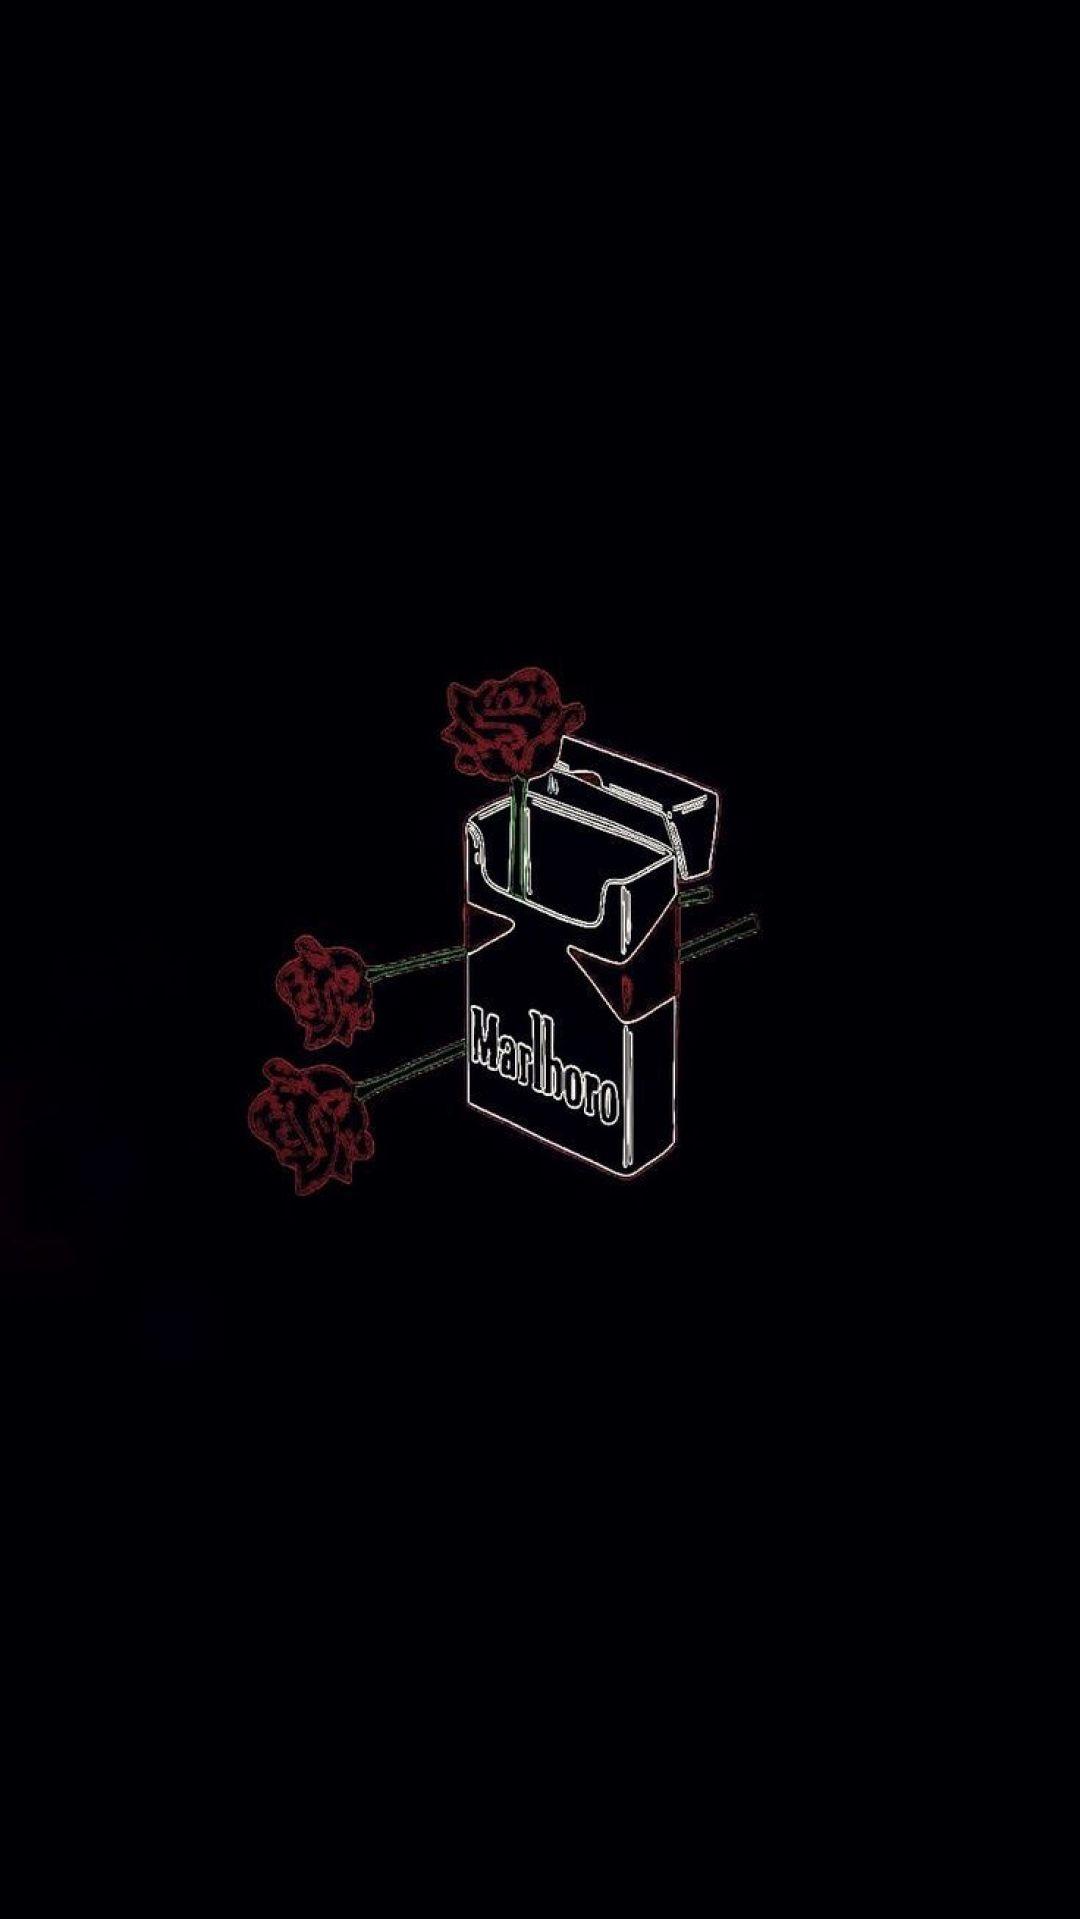 IPhone wallpaper of a cigarette box with roses on it - Sad, depression, black